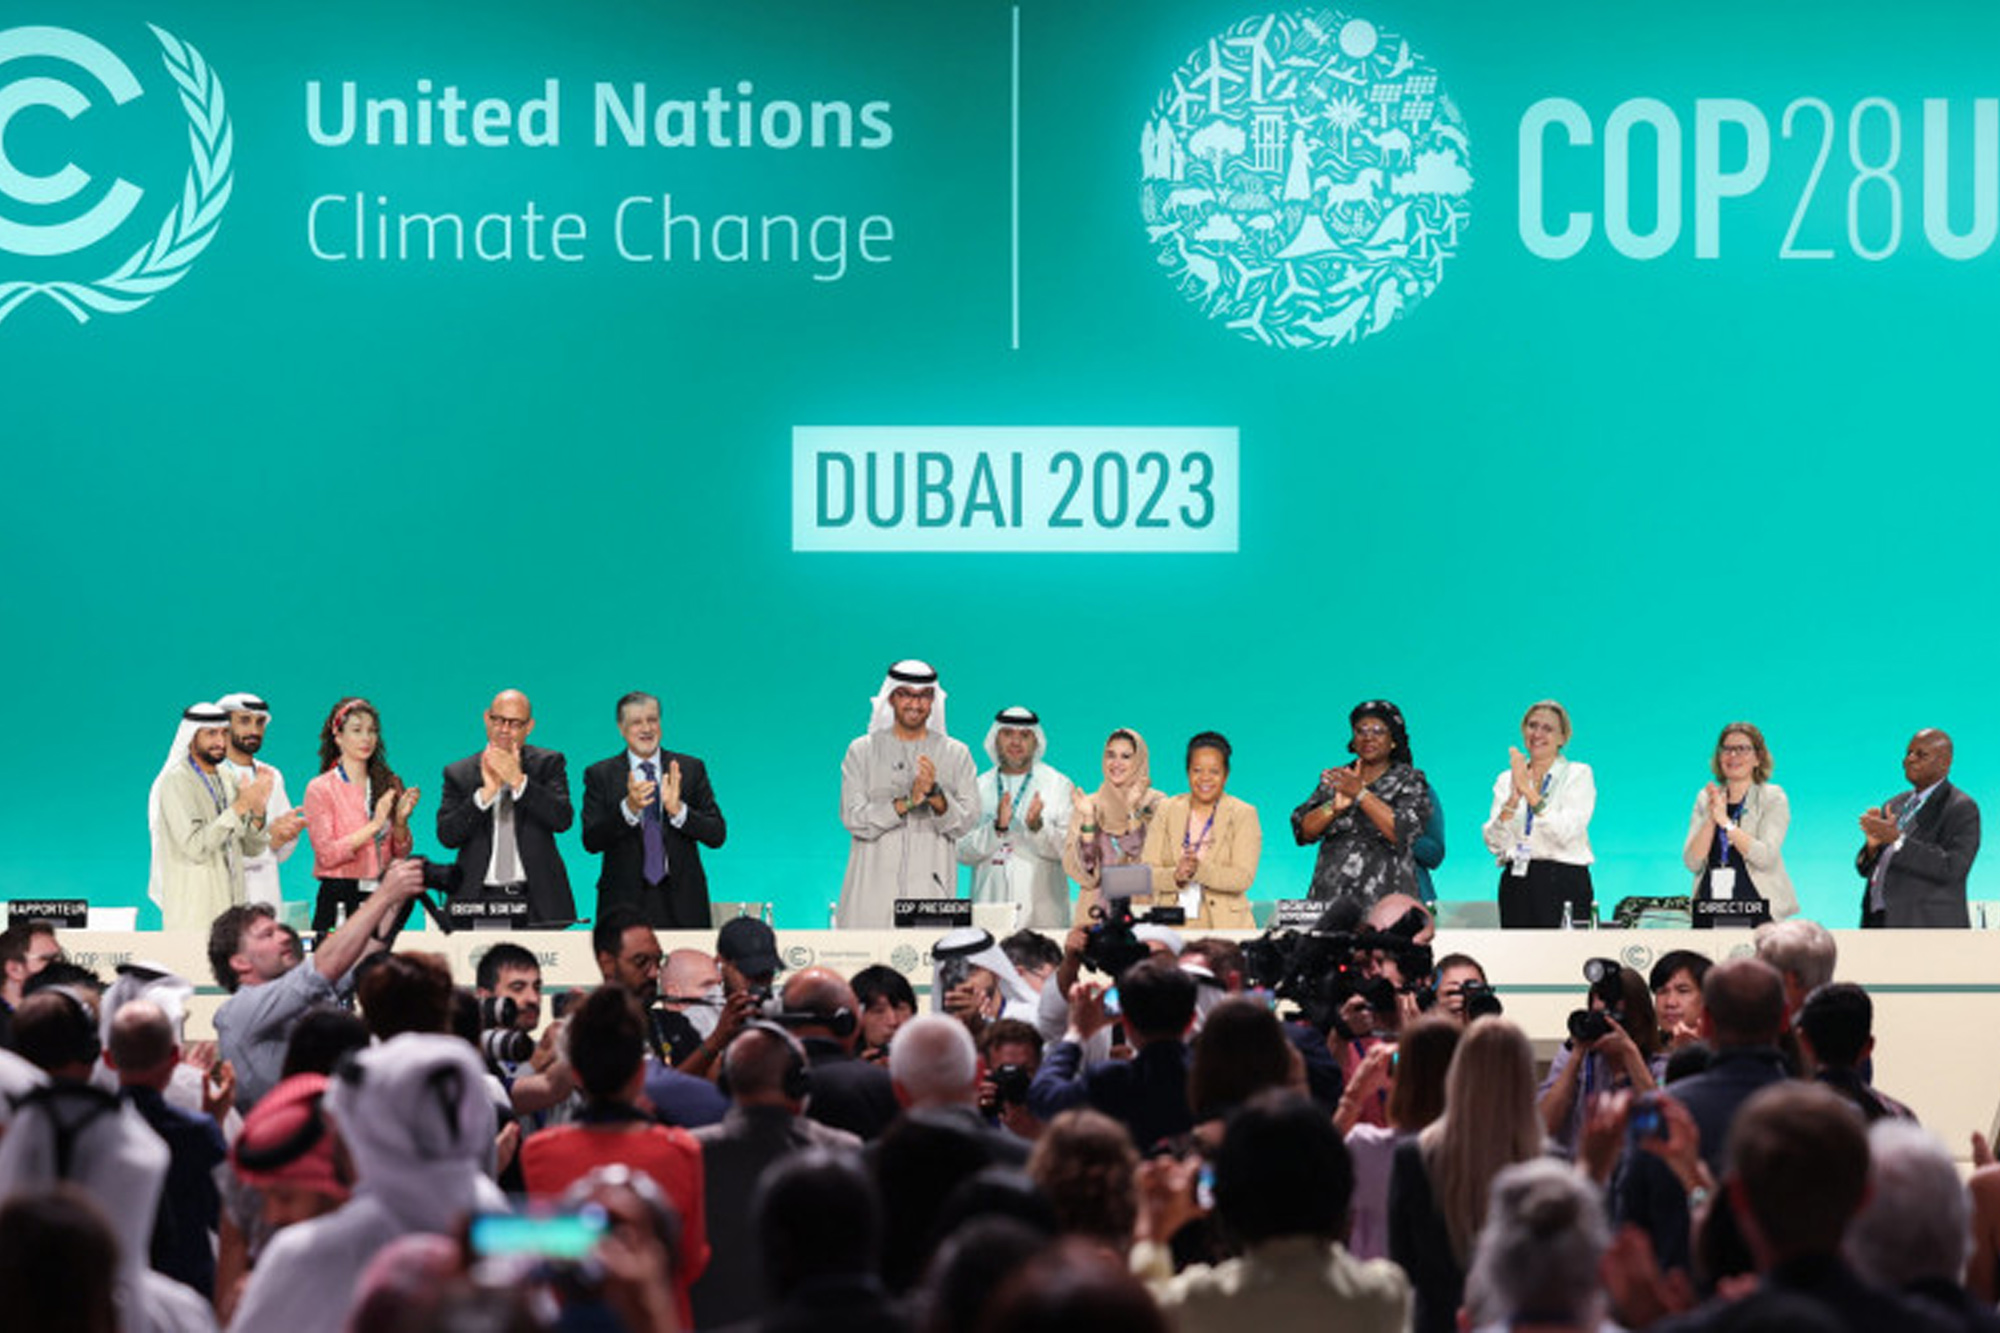 COP28 attendees applauding after reaching an agreement to move away from fossil fuels.